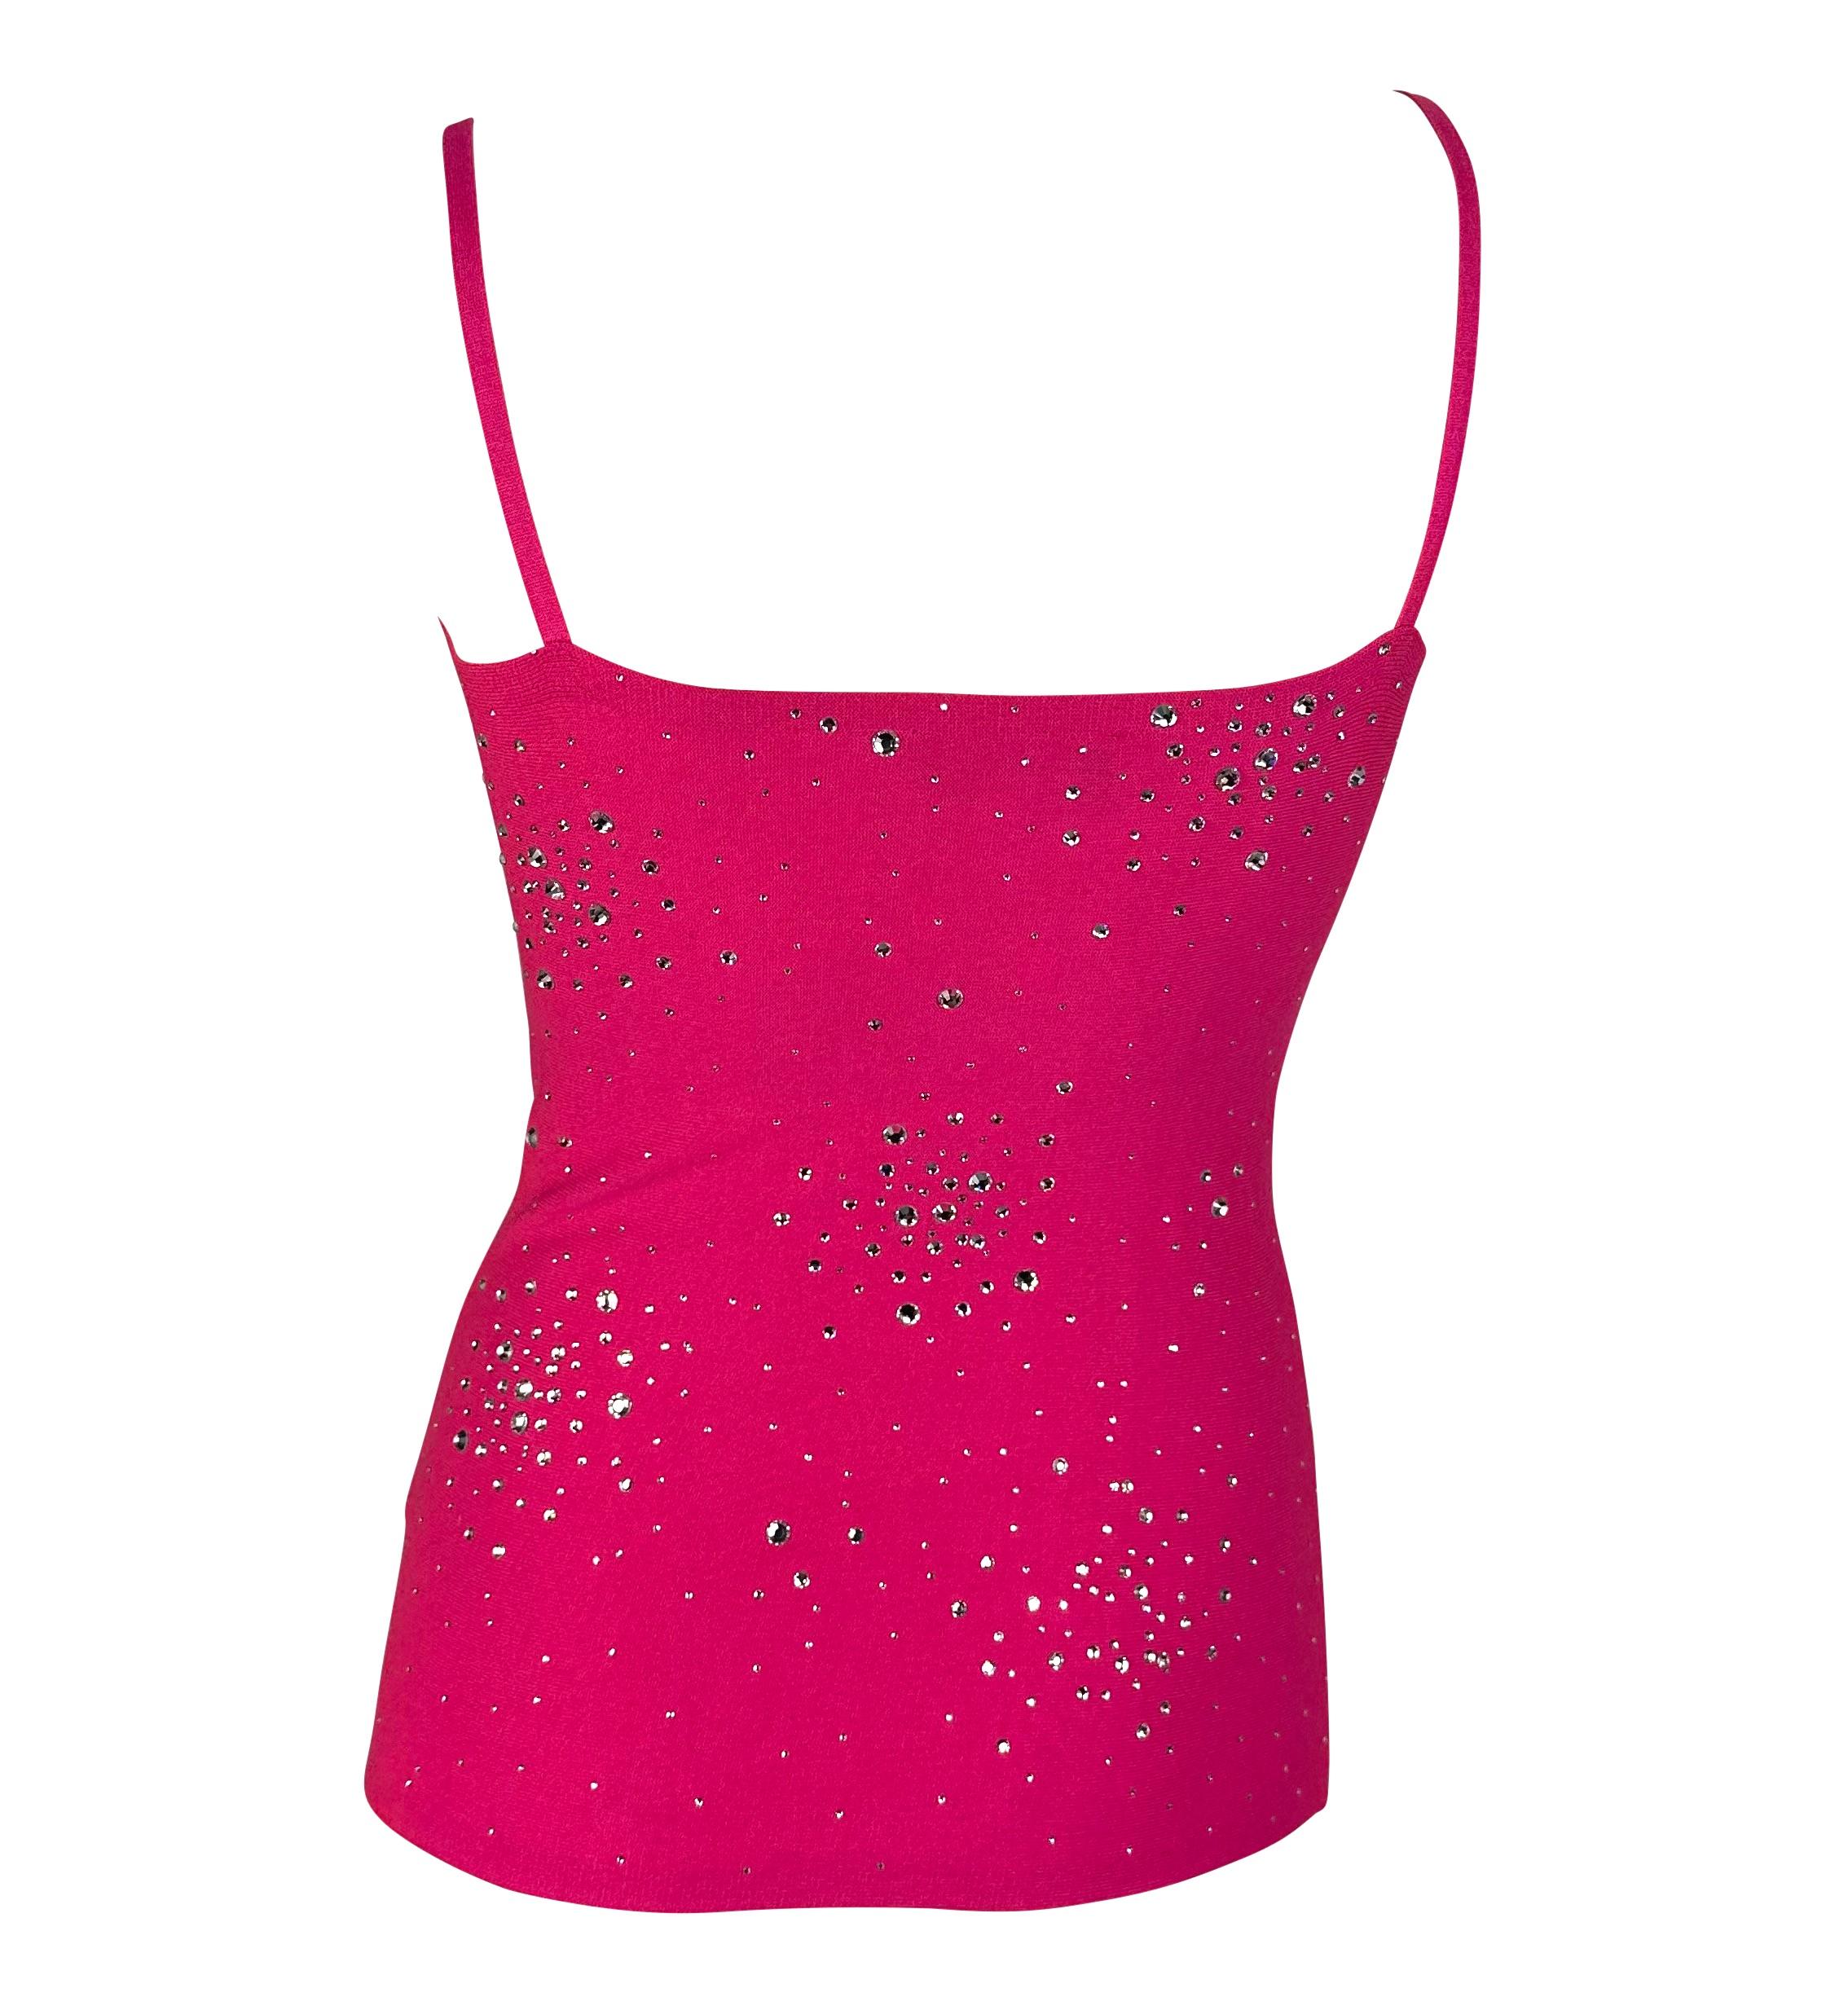 S/S 2004 Versace by Donatella Hot Pink Rhinestone Stretch Knit Tank Top  In Excellent Condition For Sale In West Hollywood, CA